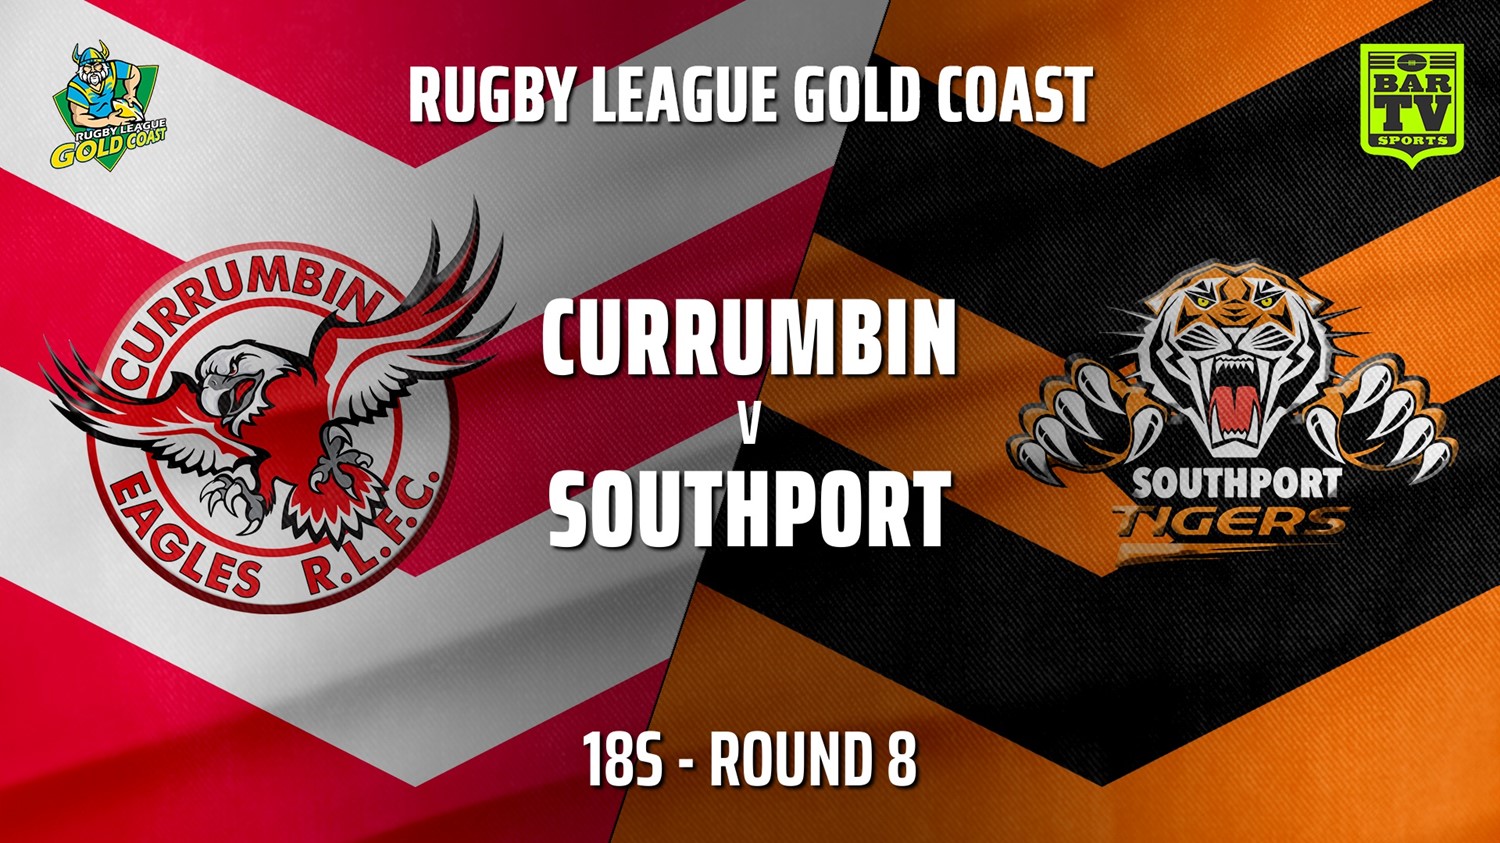 210725-Gold Coast Round 8 - 18s - Currumbin Eagles v Southport Tigers Slate Image